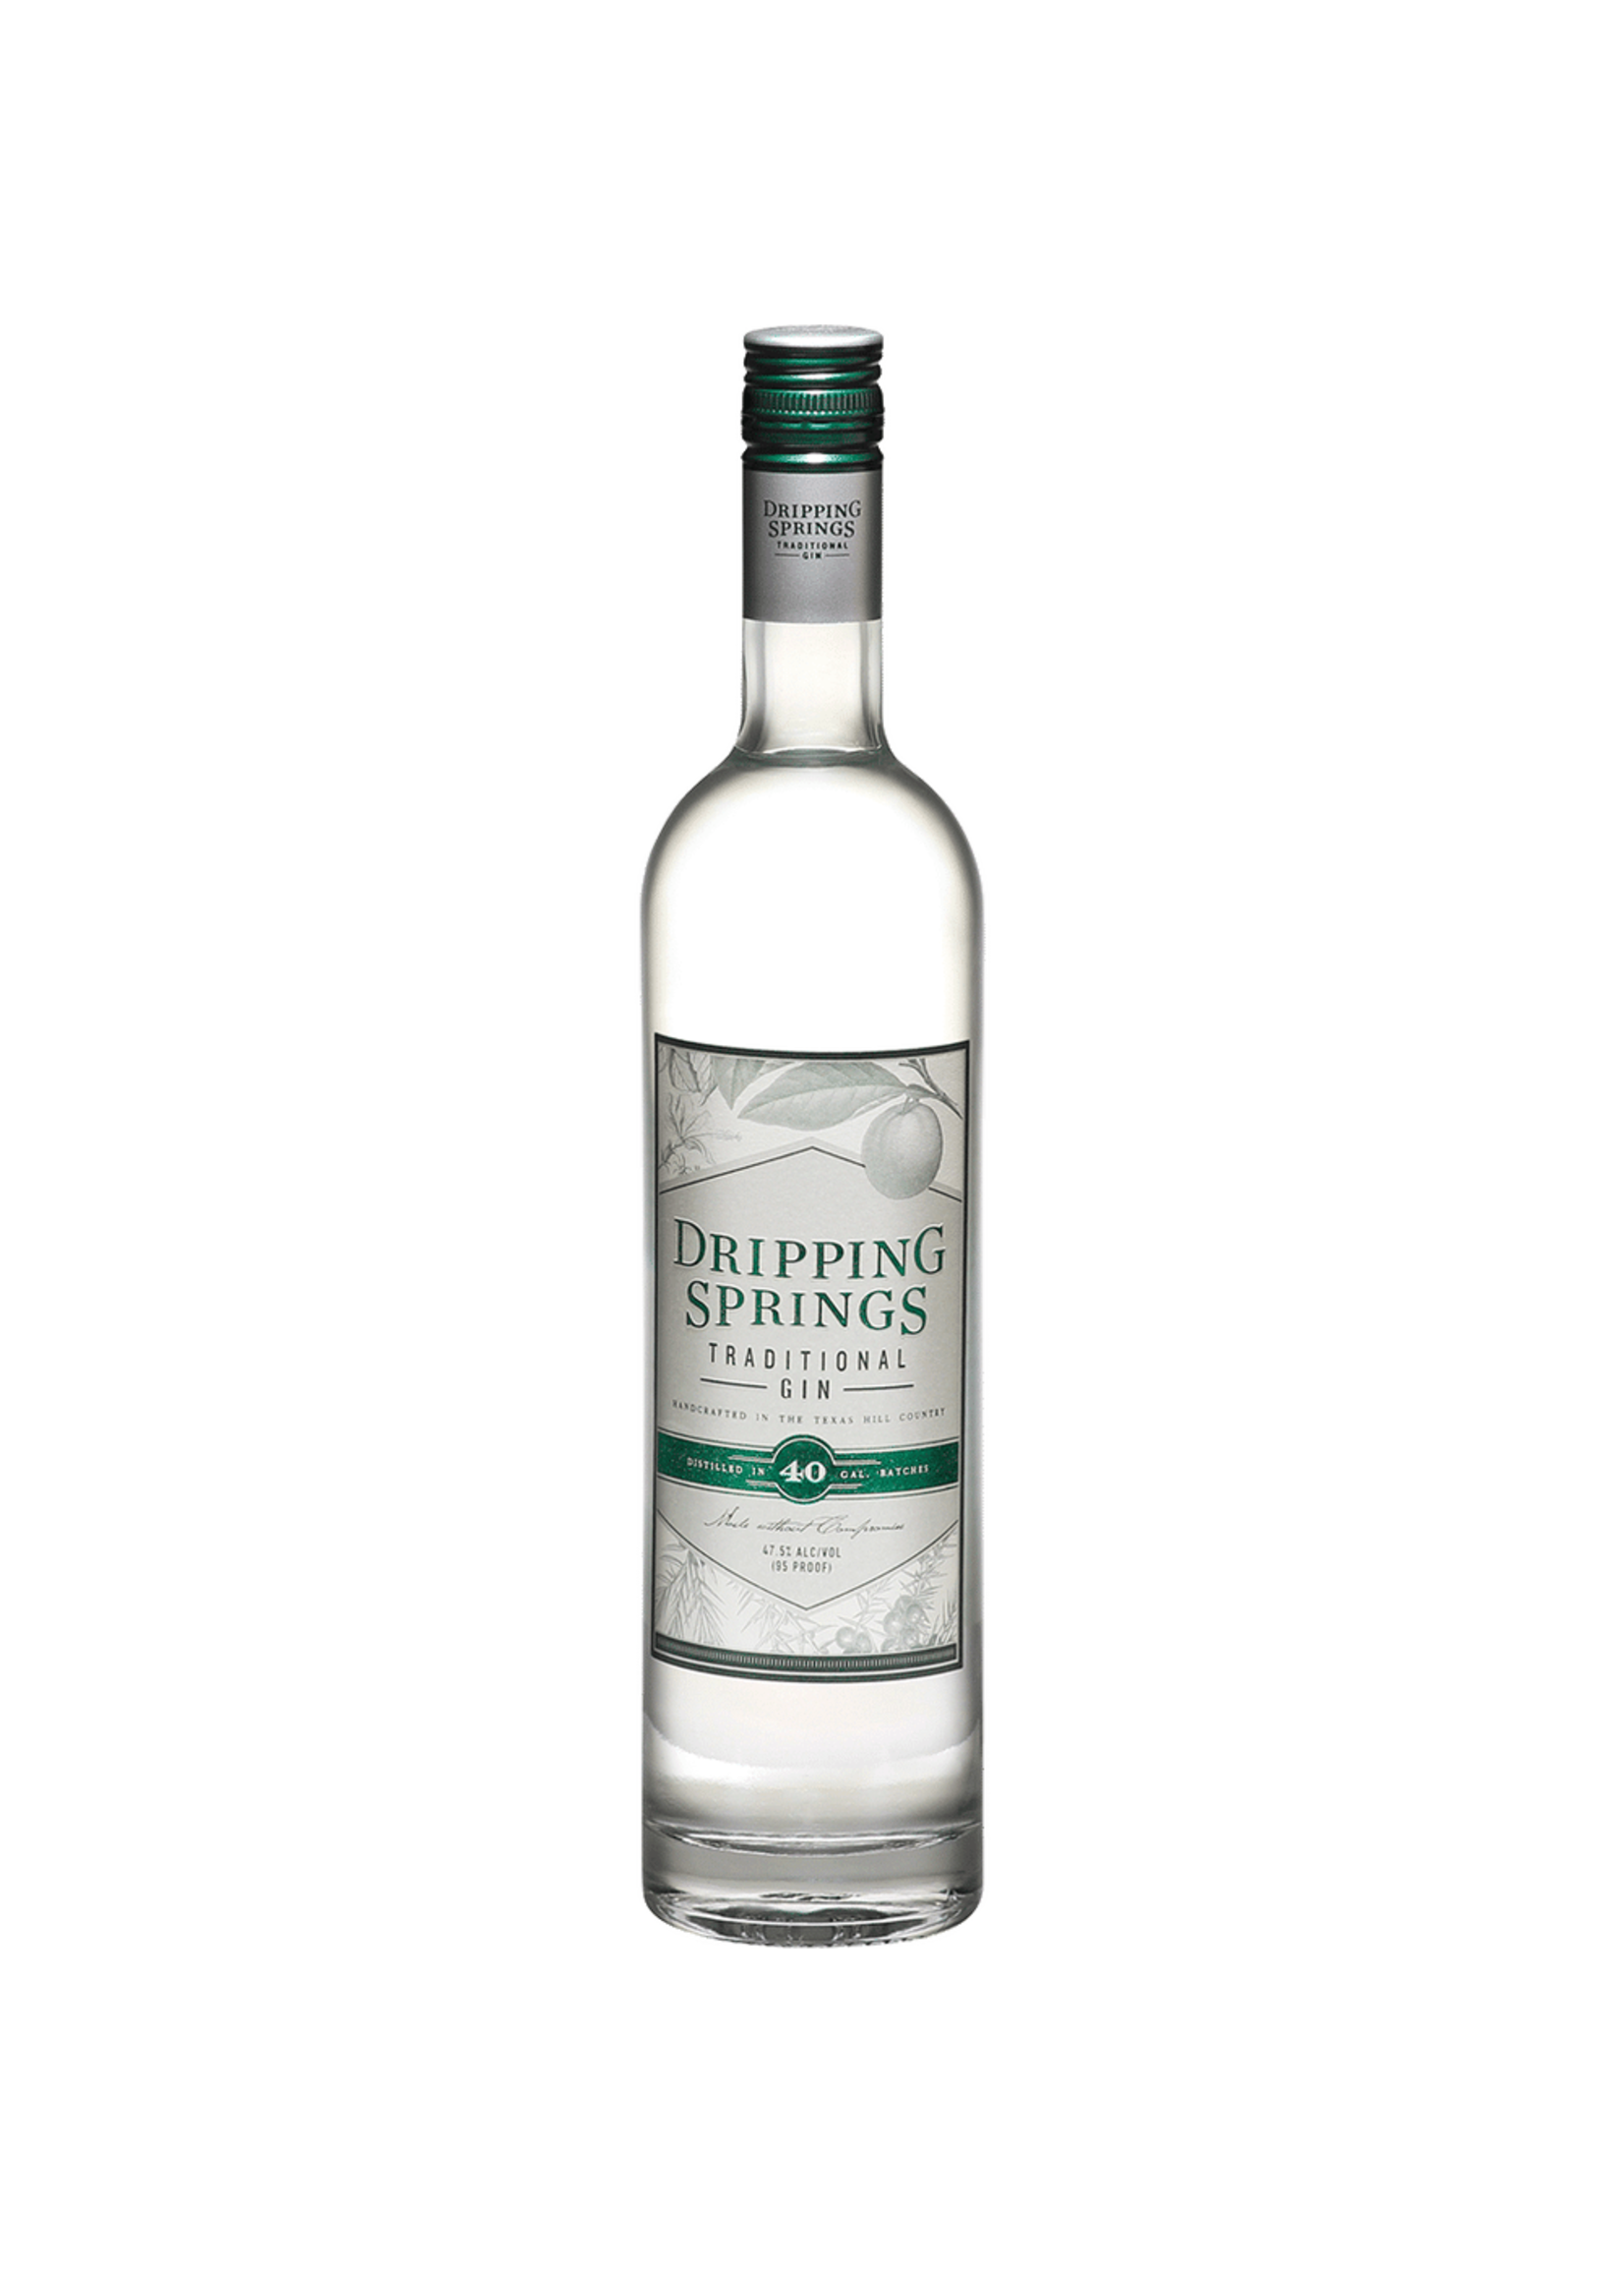 Dripping Spring Texas Dist. Dripping Springs Traditional Gin 95Proof 750ml